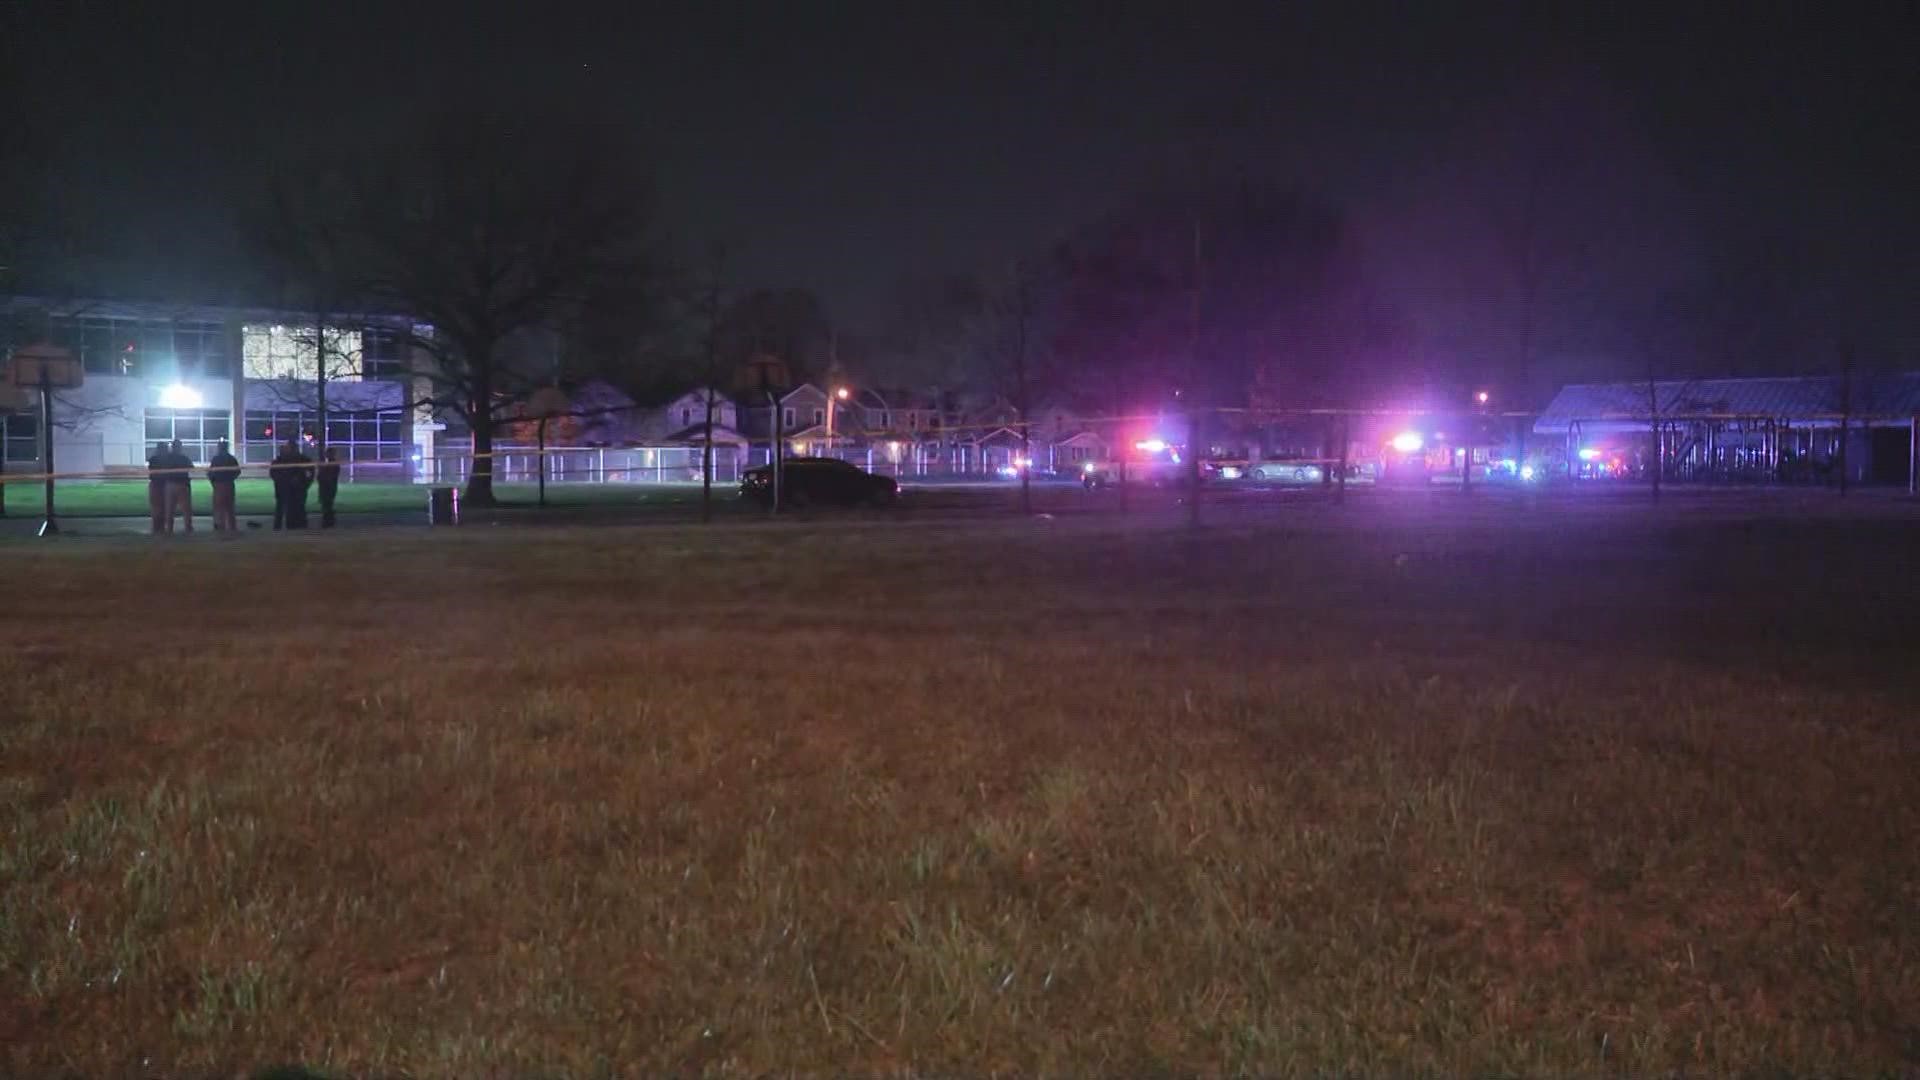 On Saturday, one person was killed in a shooting at Nafzger Park. A couple hours later, one person was killed and another was injured in a shooting at Saunders Park.